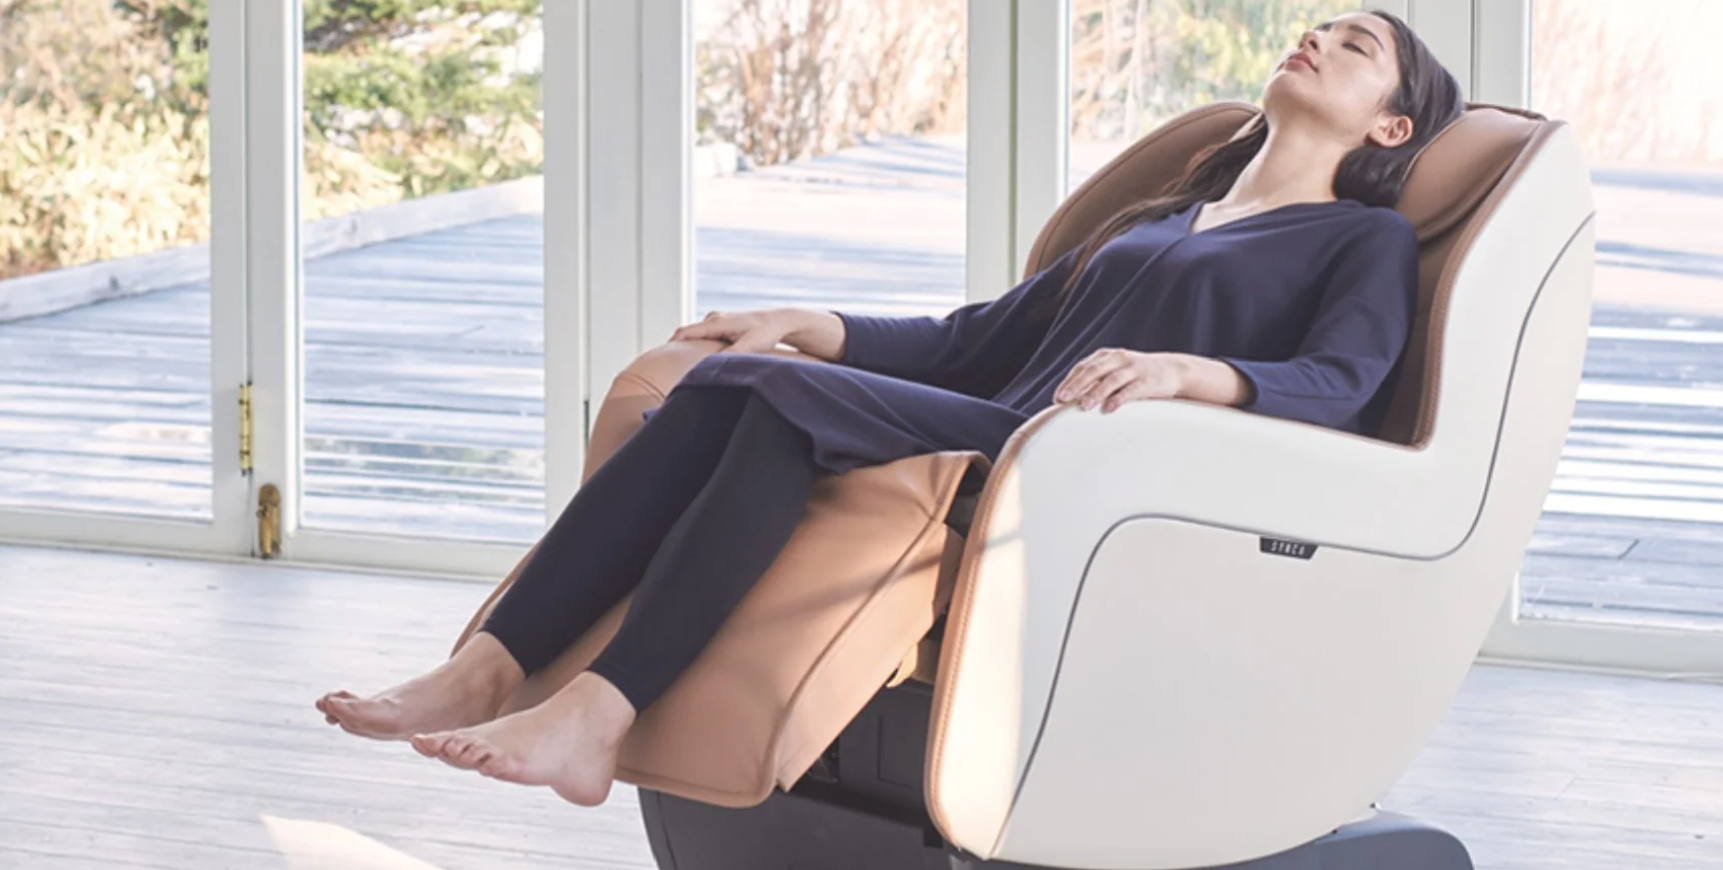 Synca Massage Chair being used